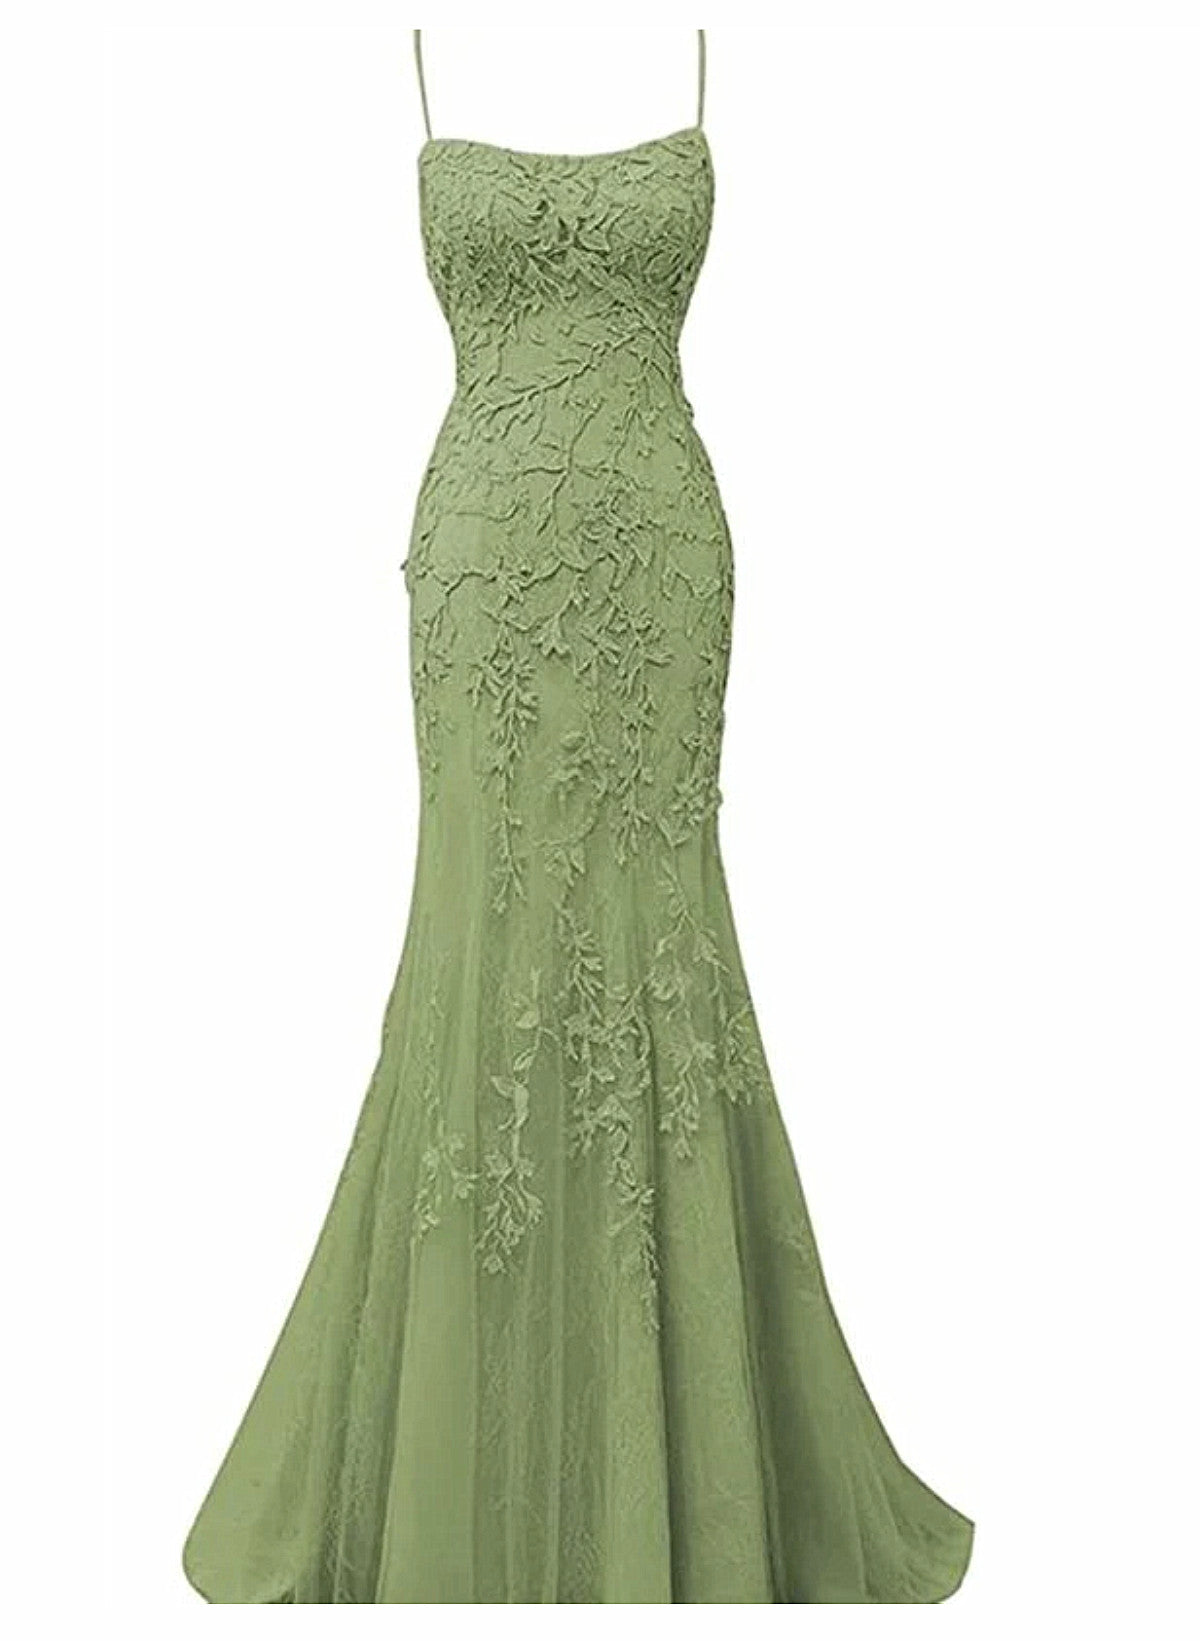 Lovely Sage Green Straps Mermaid Long Formal Dress Outfits For Girls, Lace-Up Evening Dress Outfits For Women Prom Dress